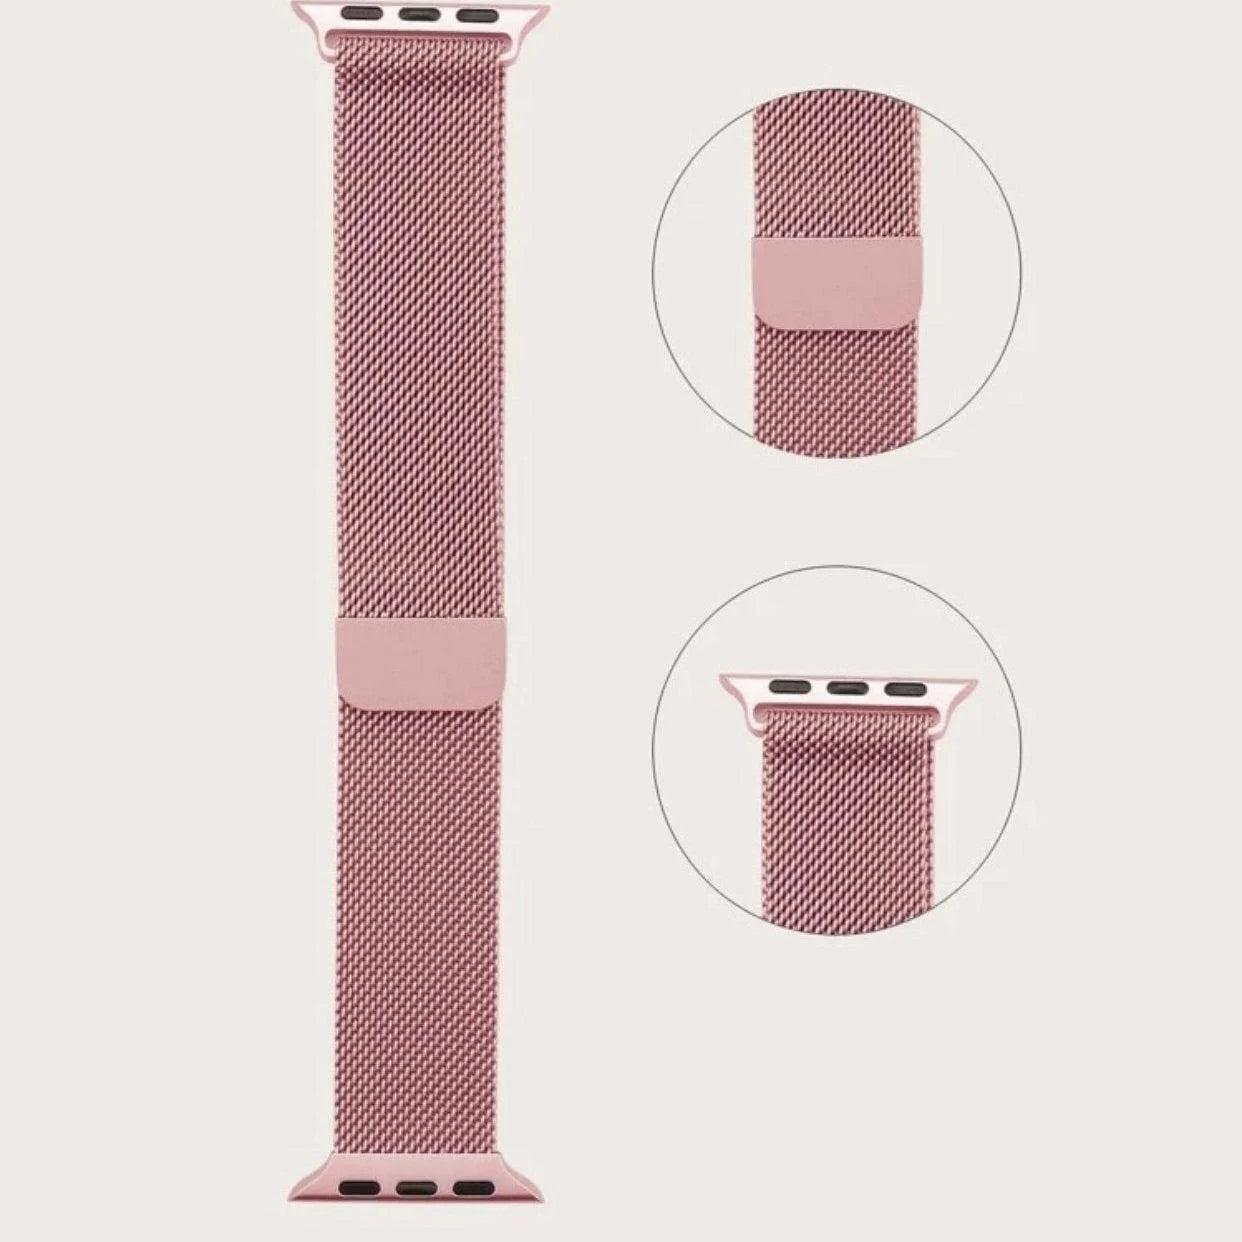 Curea Apple Watchband Milanese Pink Gold Anca's Store 